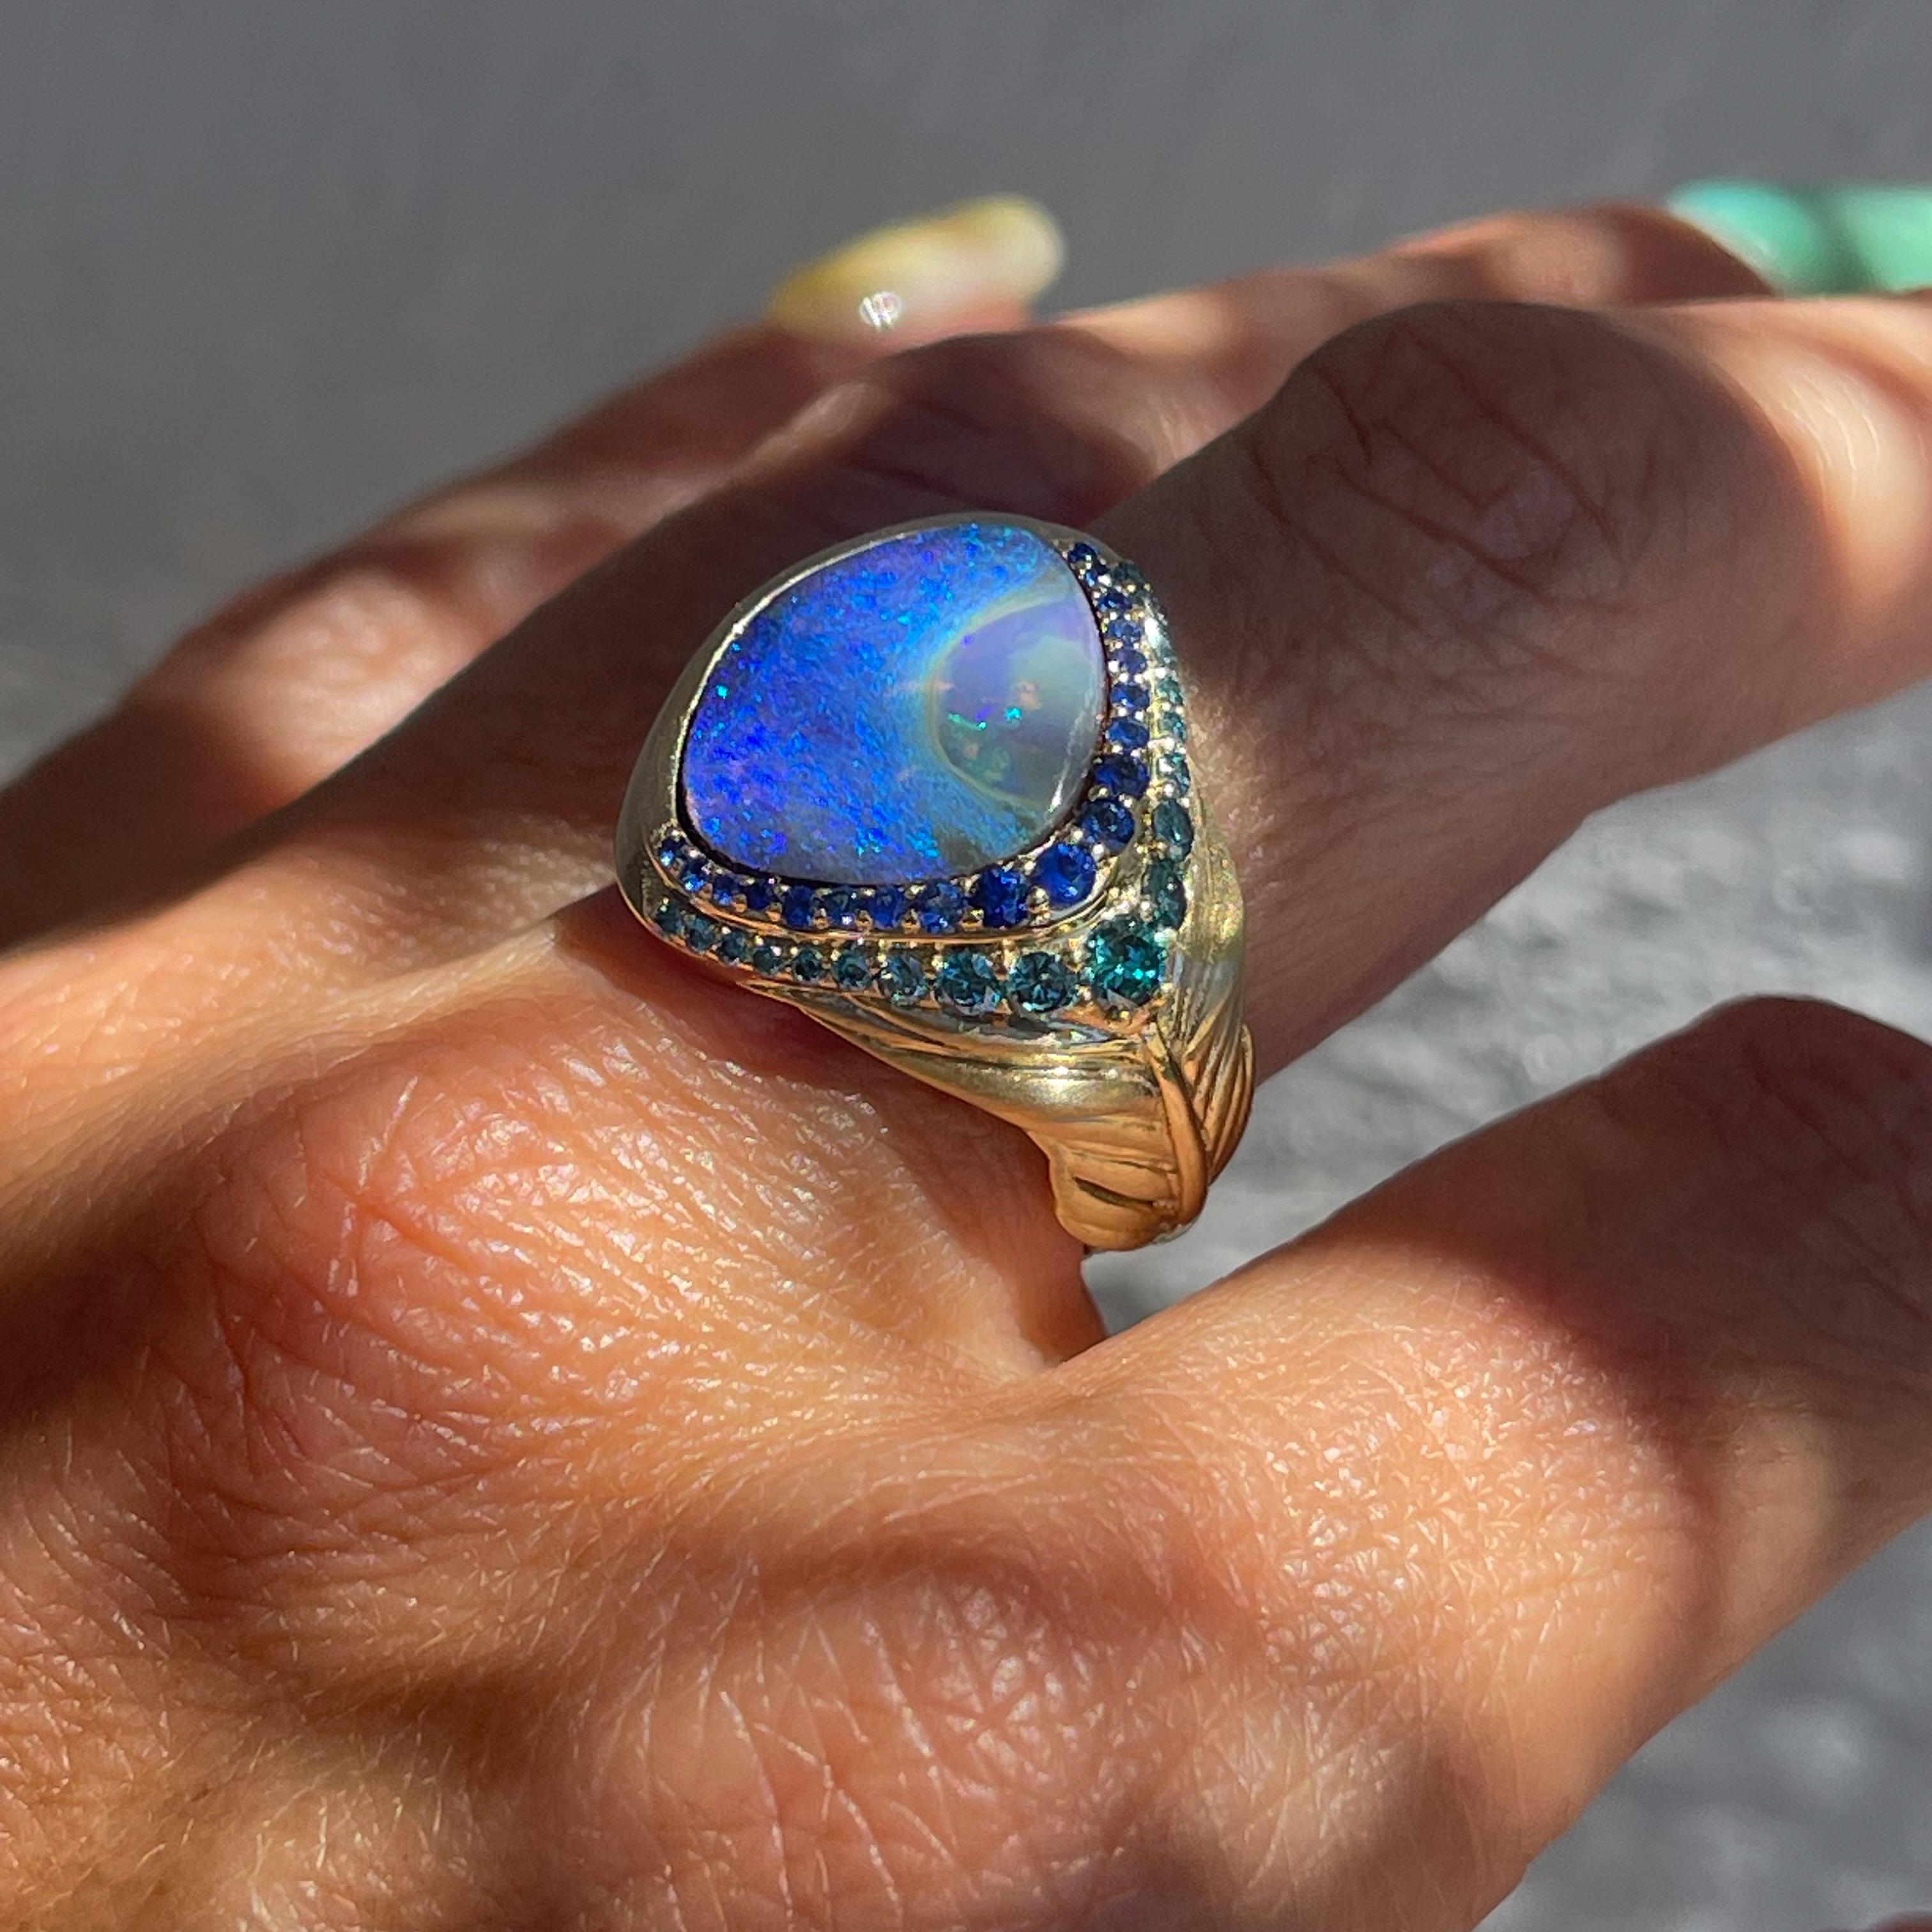 Plume Australian Opal Ring in Gold with Sapphires and Diamonds by NIXIN Jewelry In New Condition For Sale In Los Angeles, CA